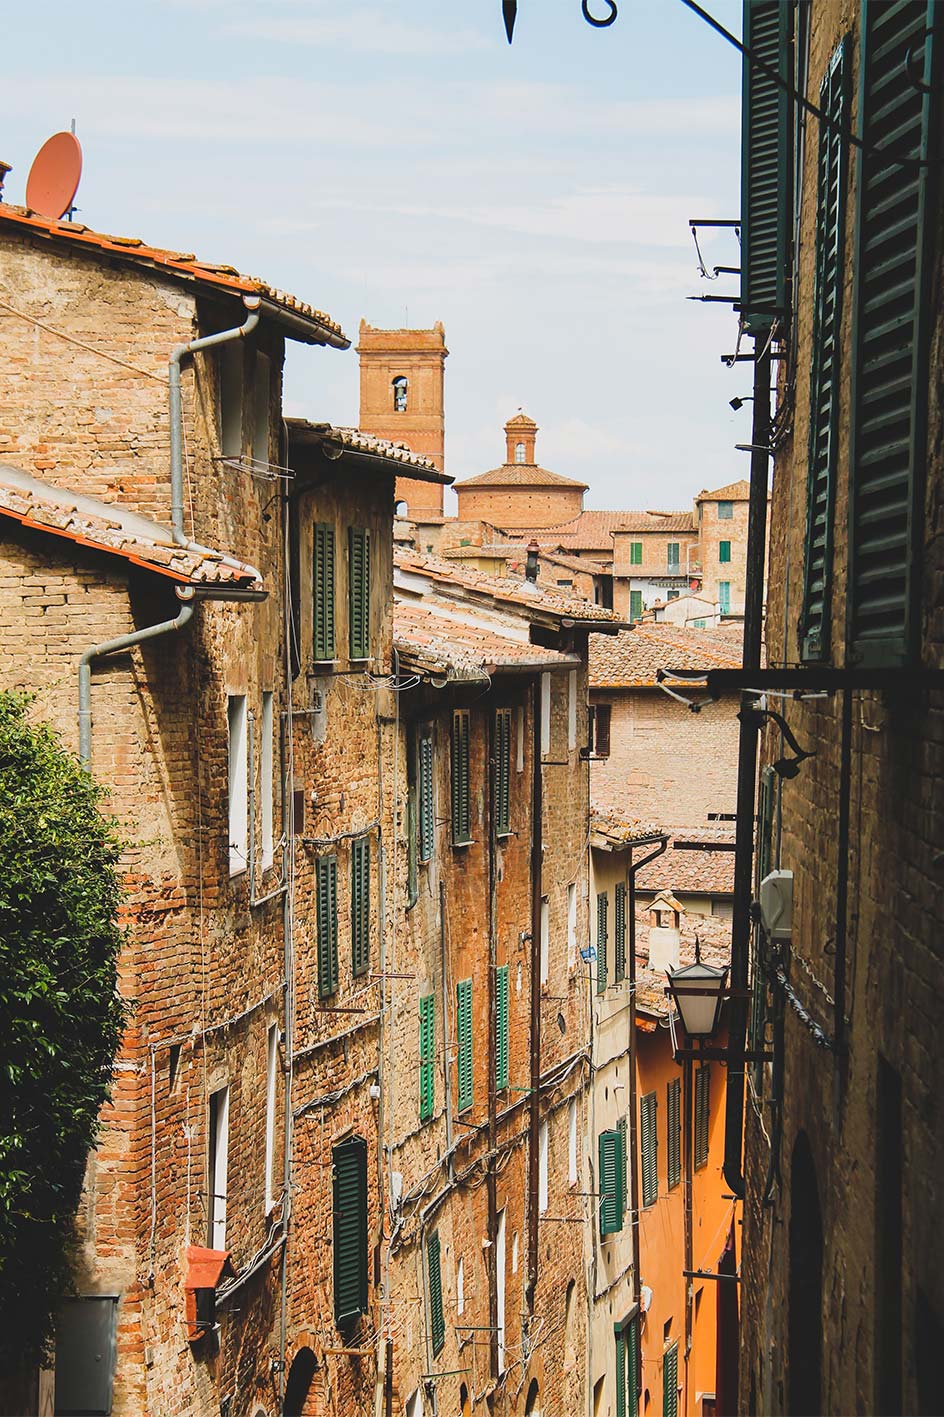 Old authentic buildings in streets of Siena